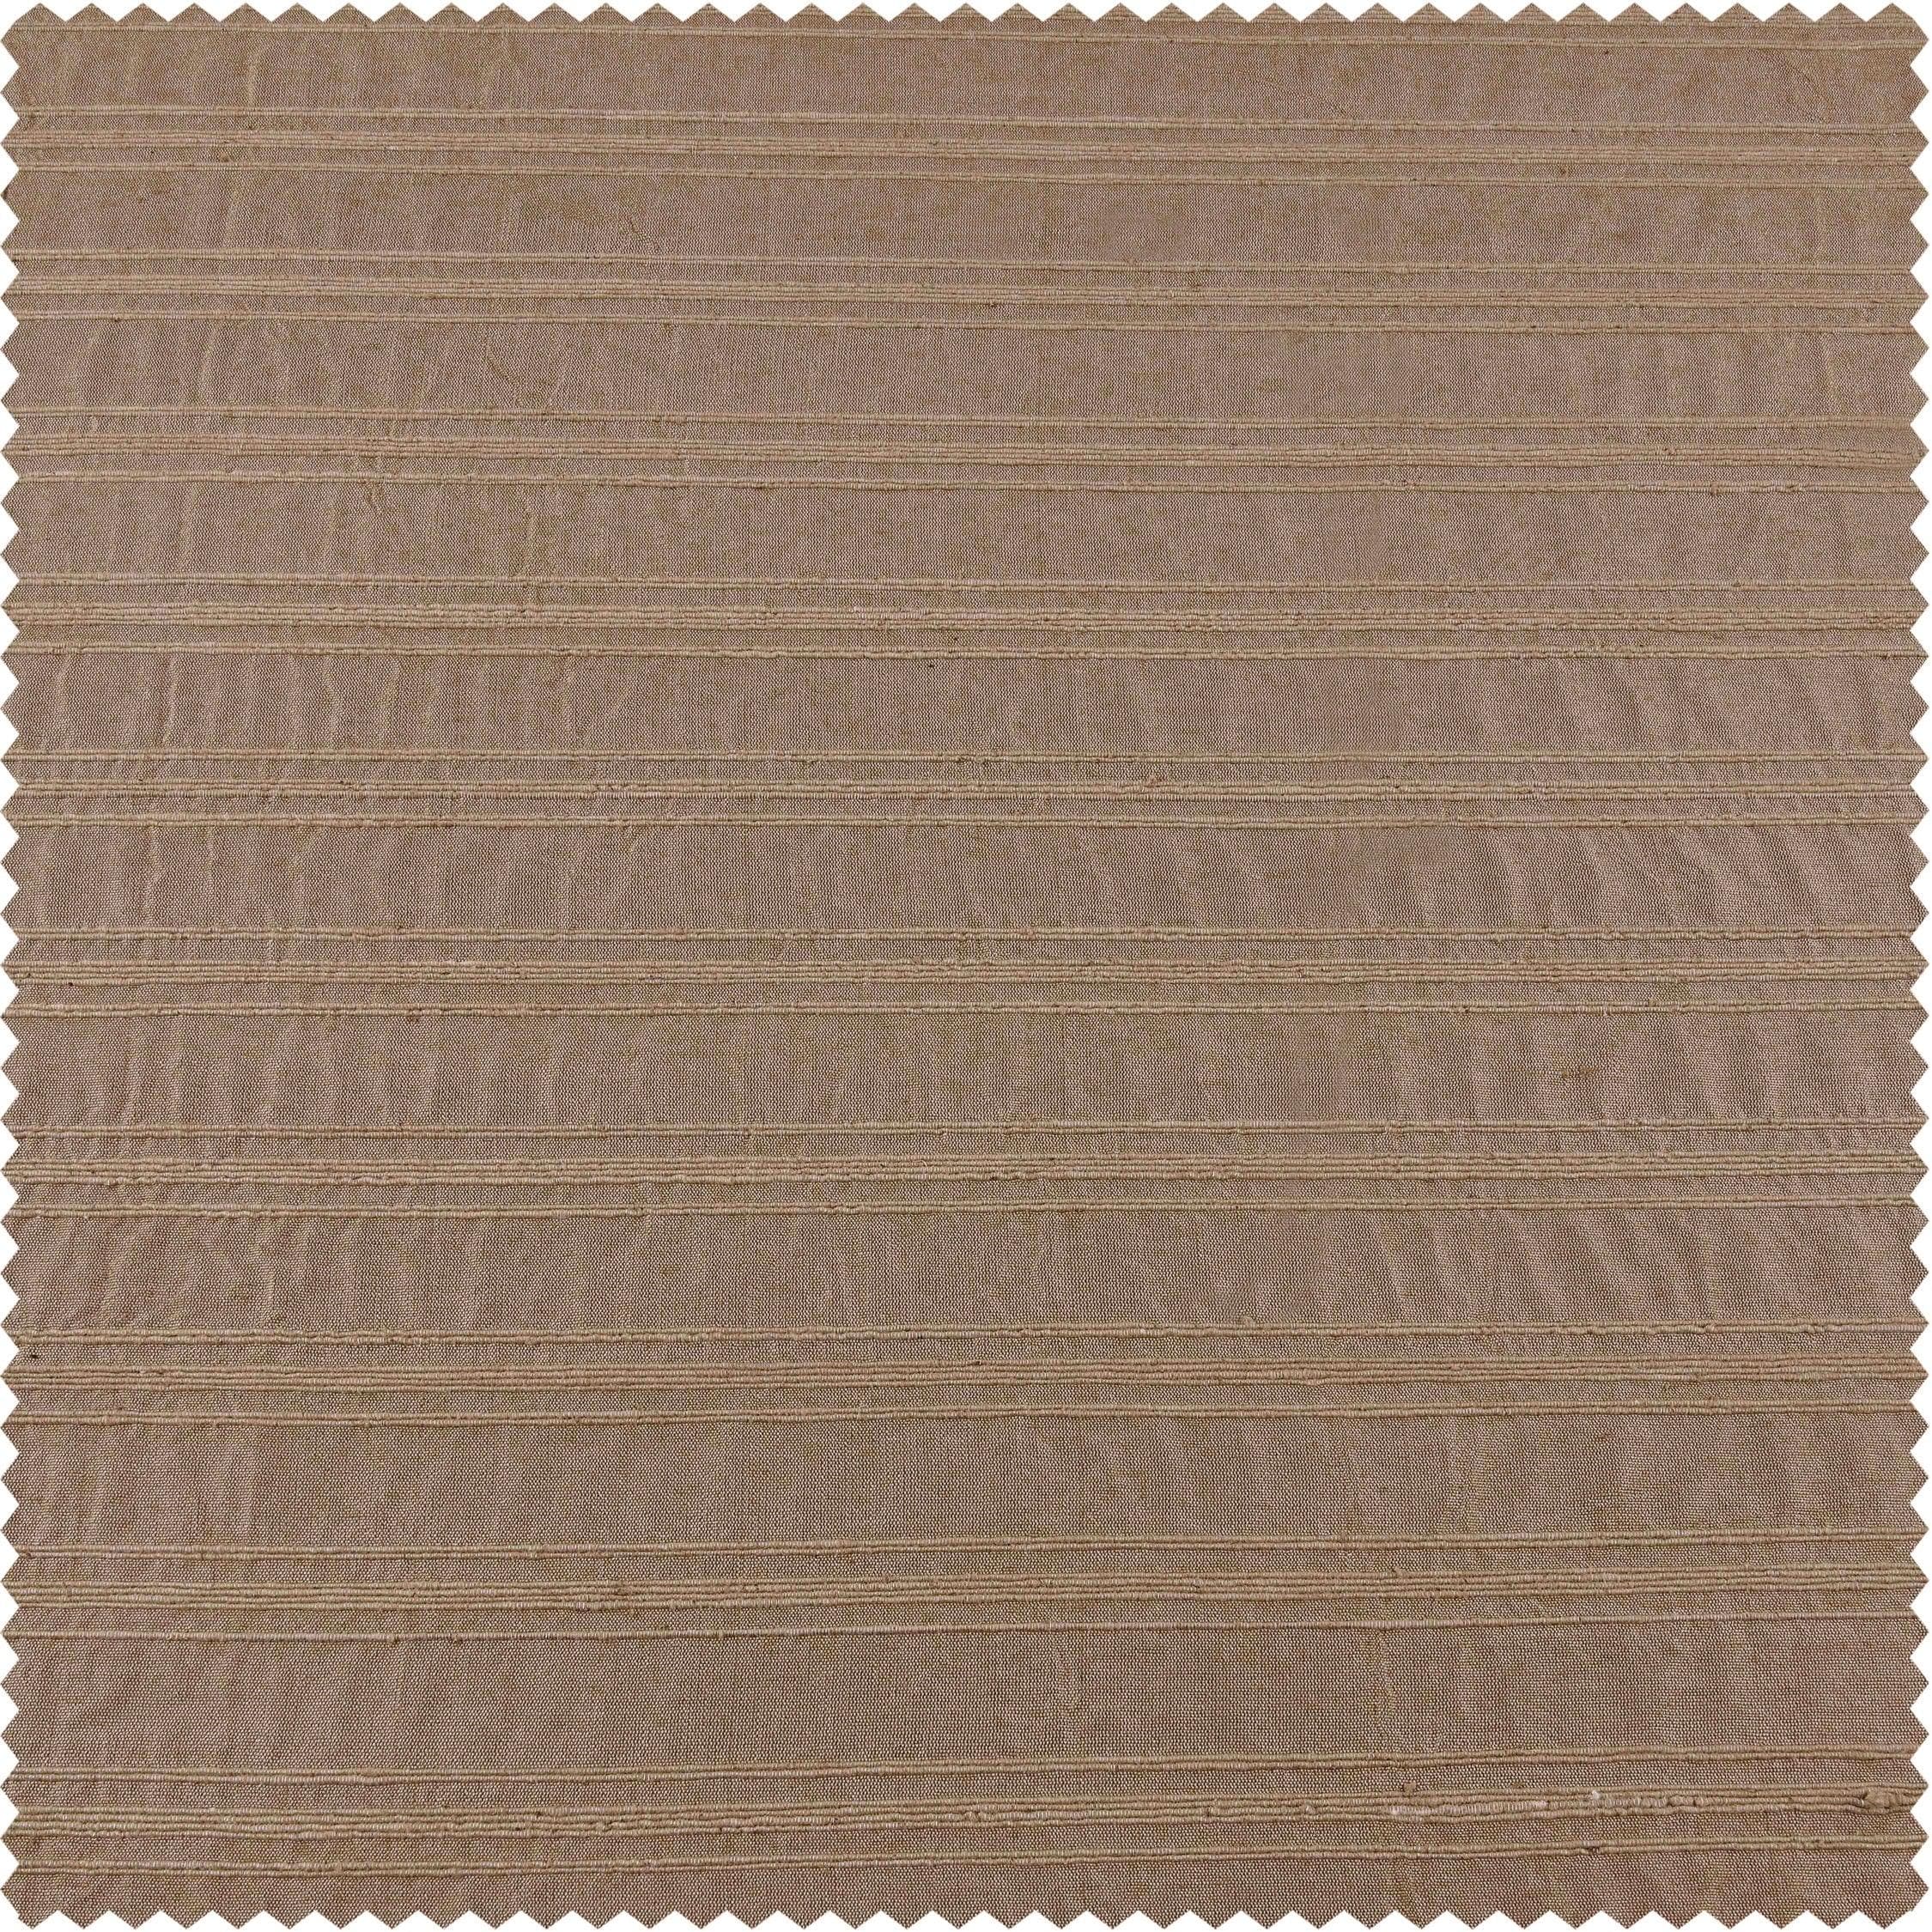 Chai Tea Taupe Striped Hand Weaved Cotton Swatch